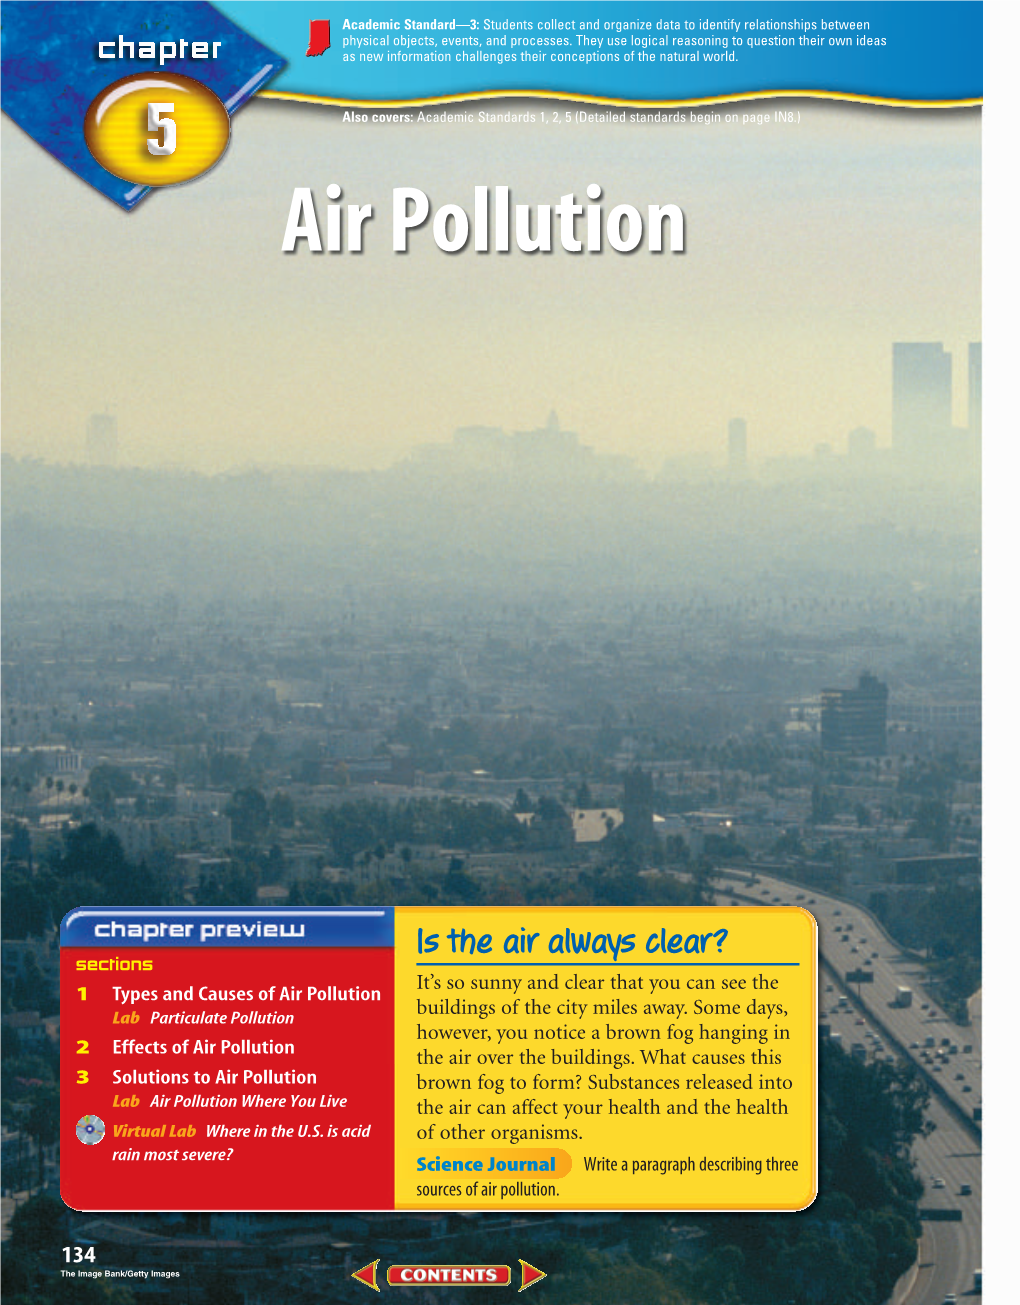 Chapter 5: Air Pollution